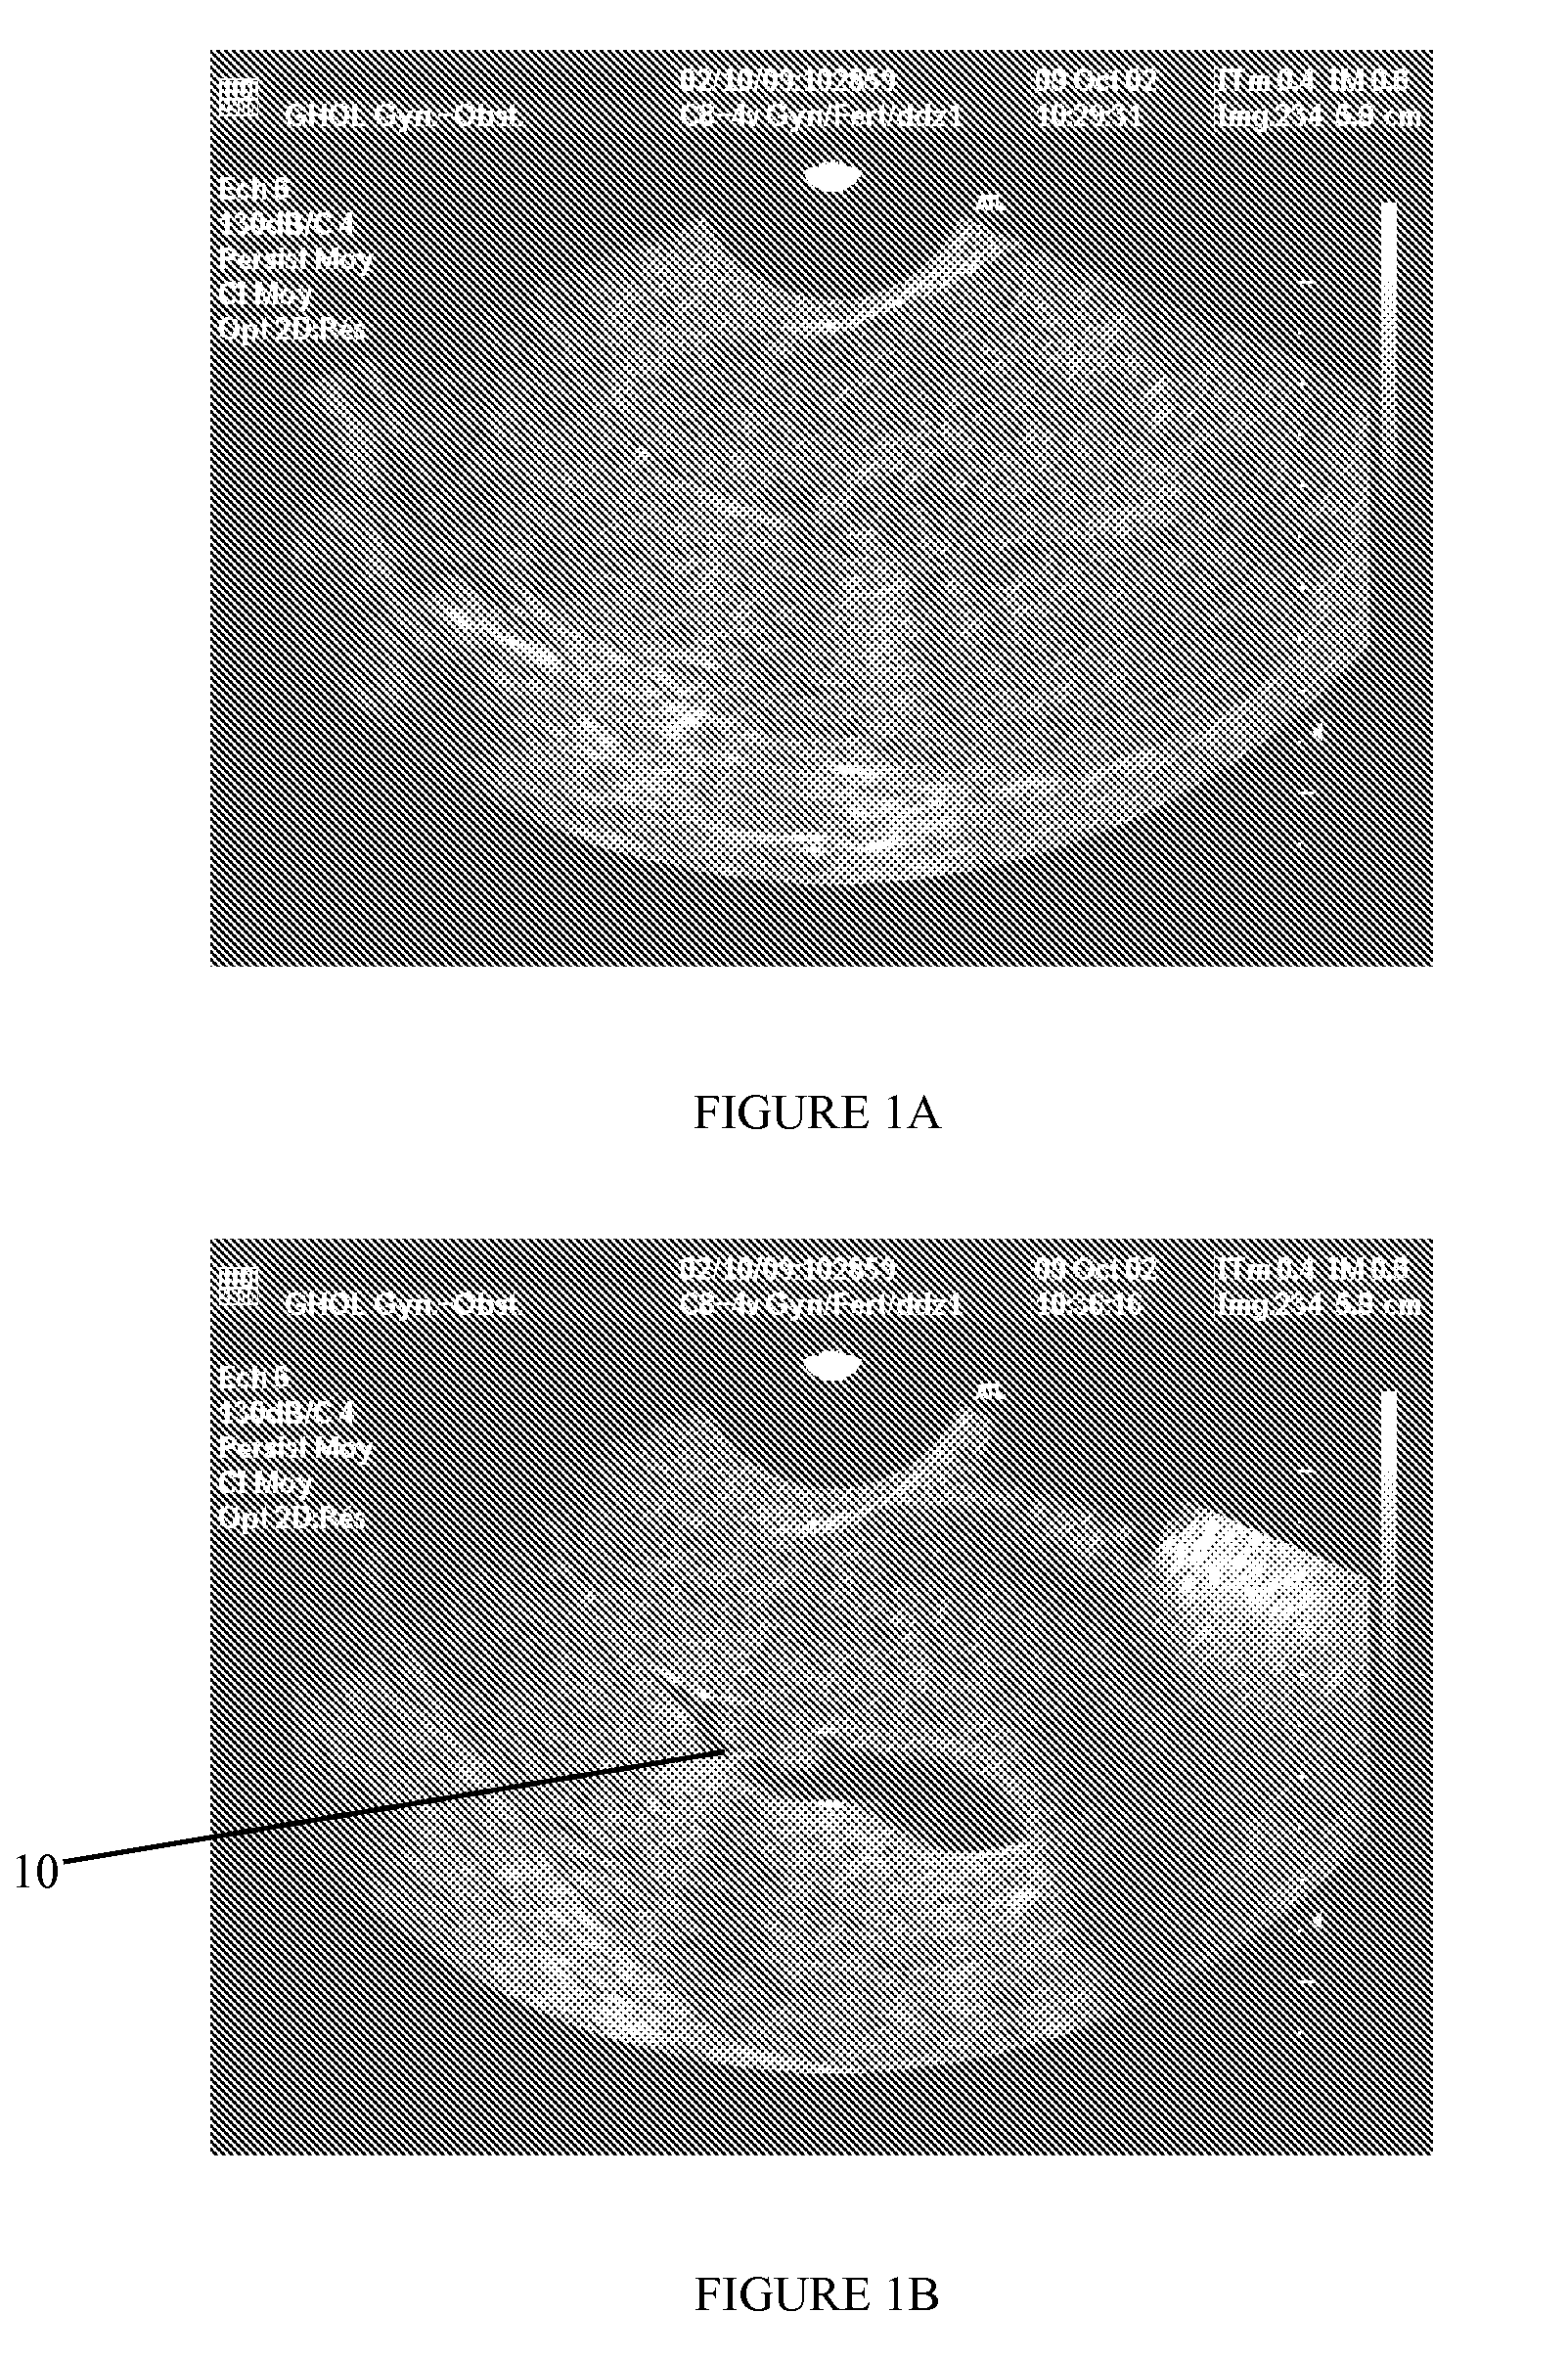 Medium for contrast enhancement or convenience for ultrasonic, endoscopic, and other medical examinations